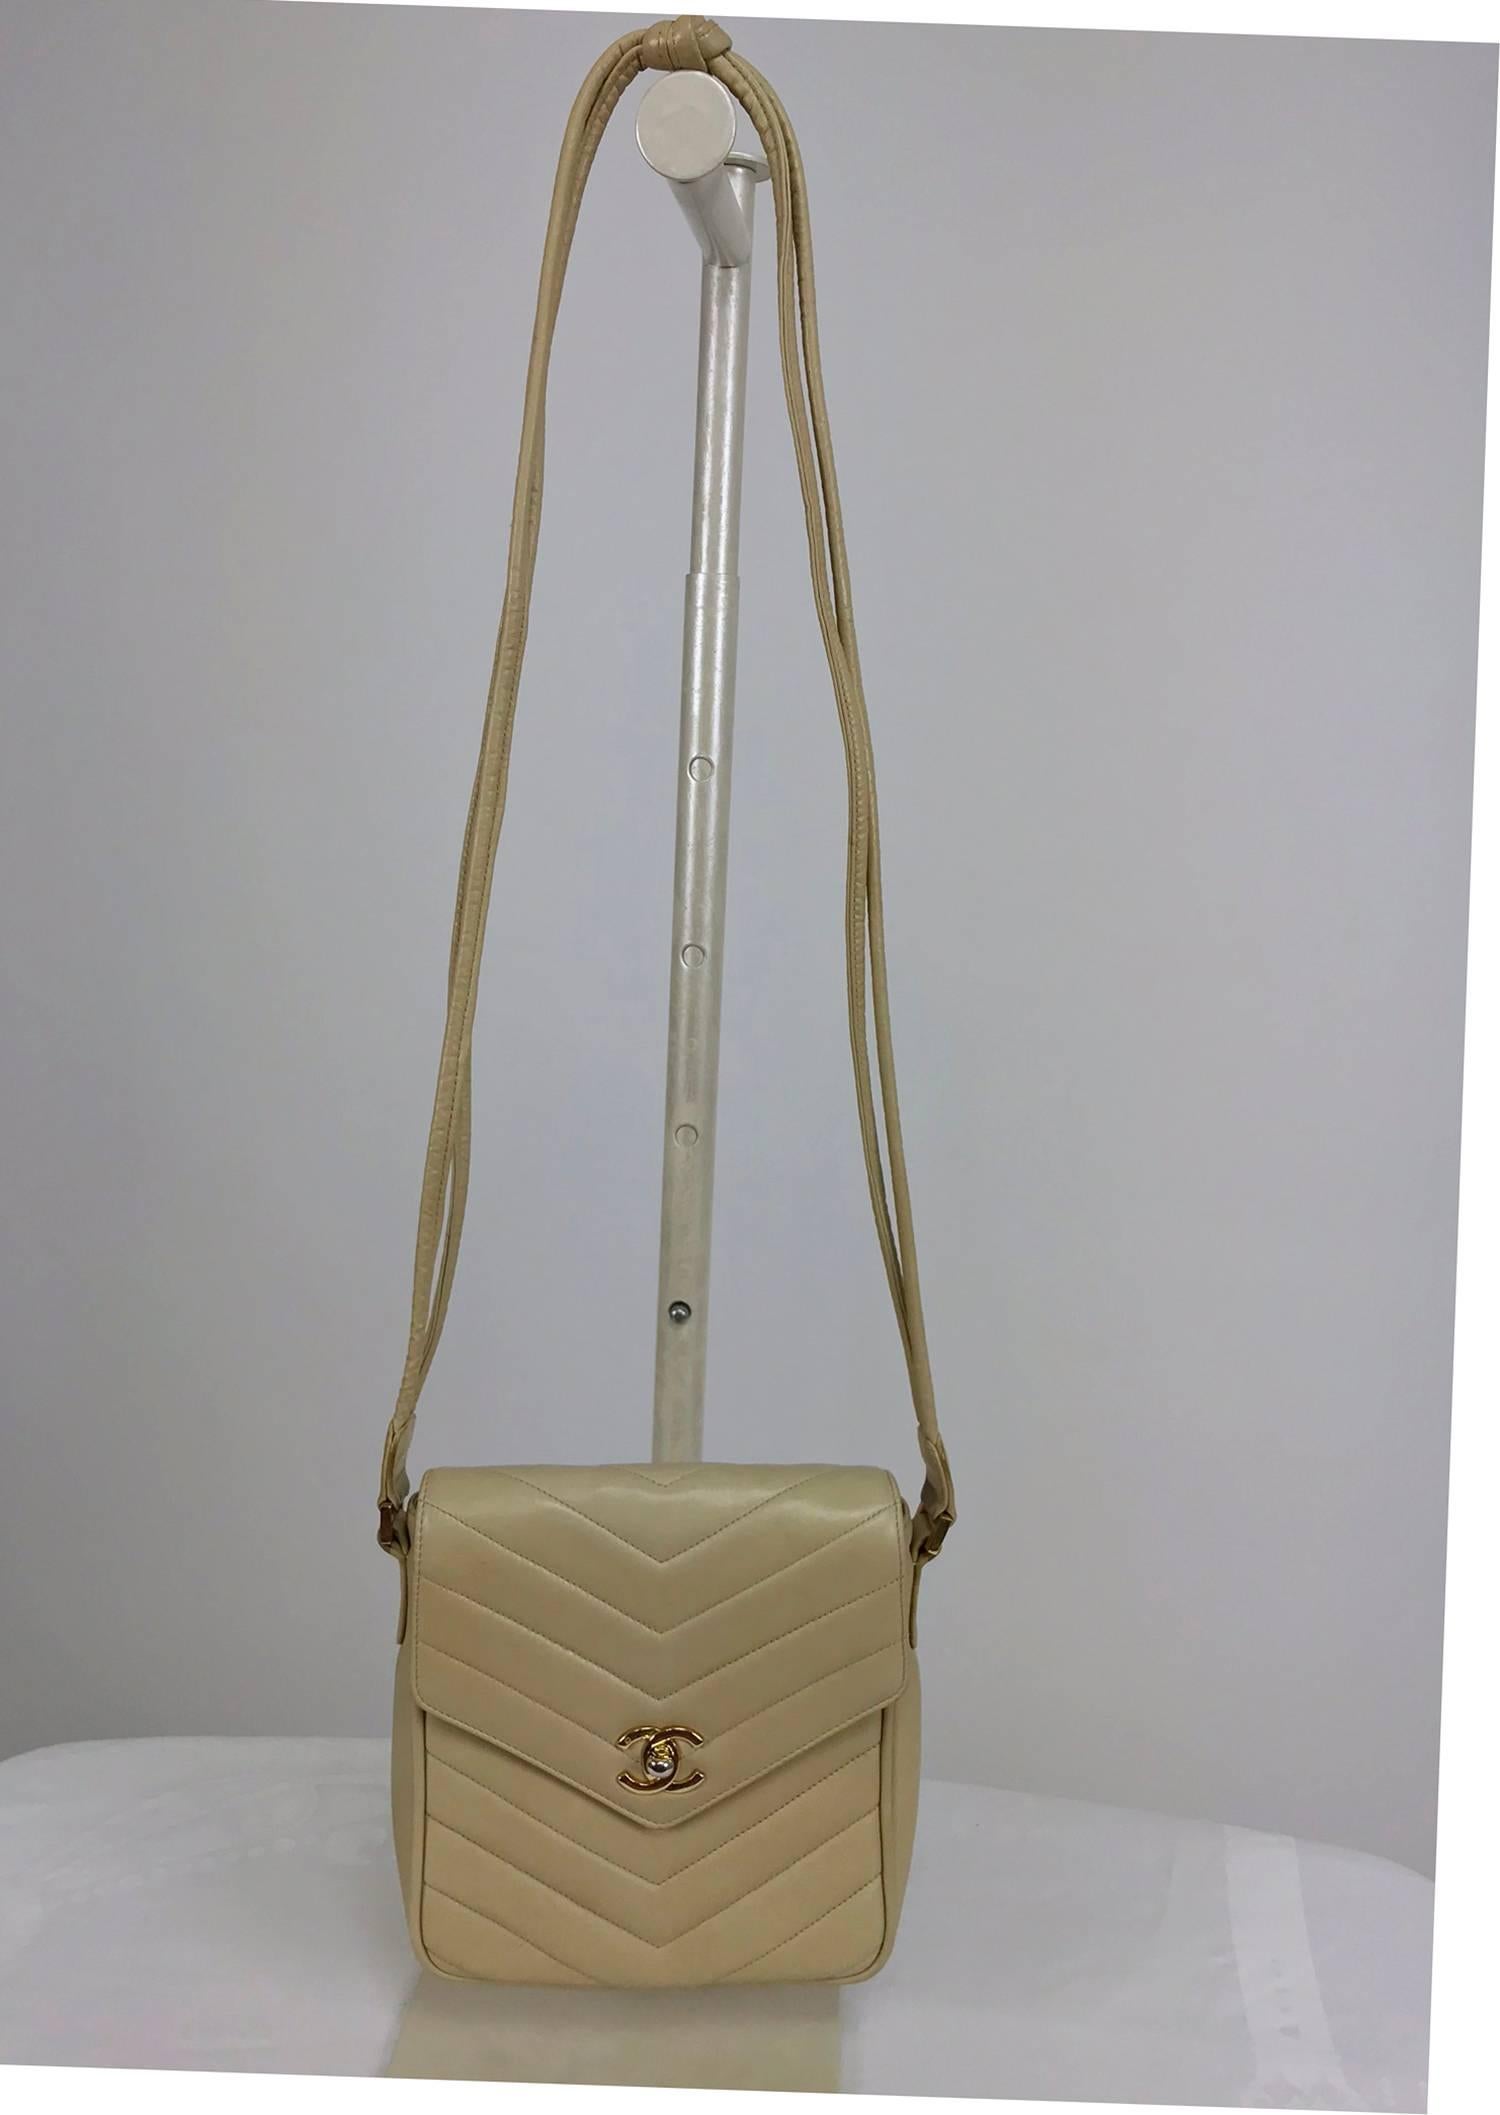 Chanel beige chevron leather  shoulder/cross body camera style handbag from the late 1980s...A beautiful bag with a lovely patina and perfect if a large bag is more than you need...Can be worn as a cross body, the strap drop is 18 inches, so check